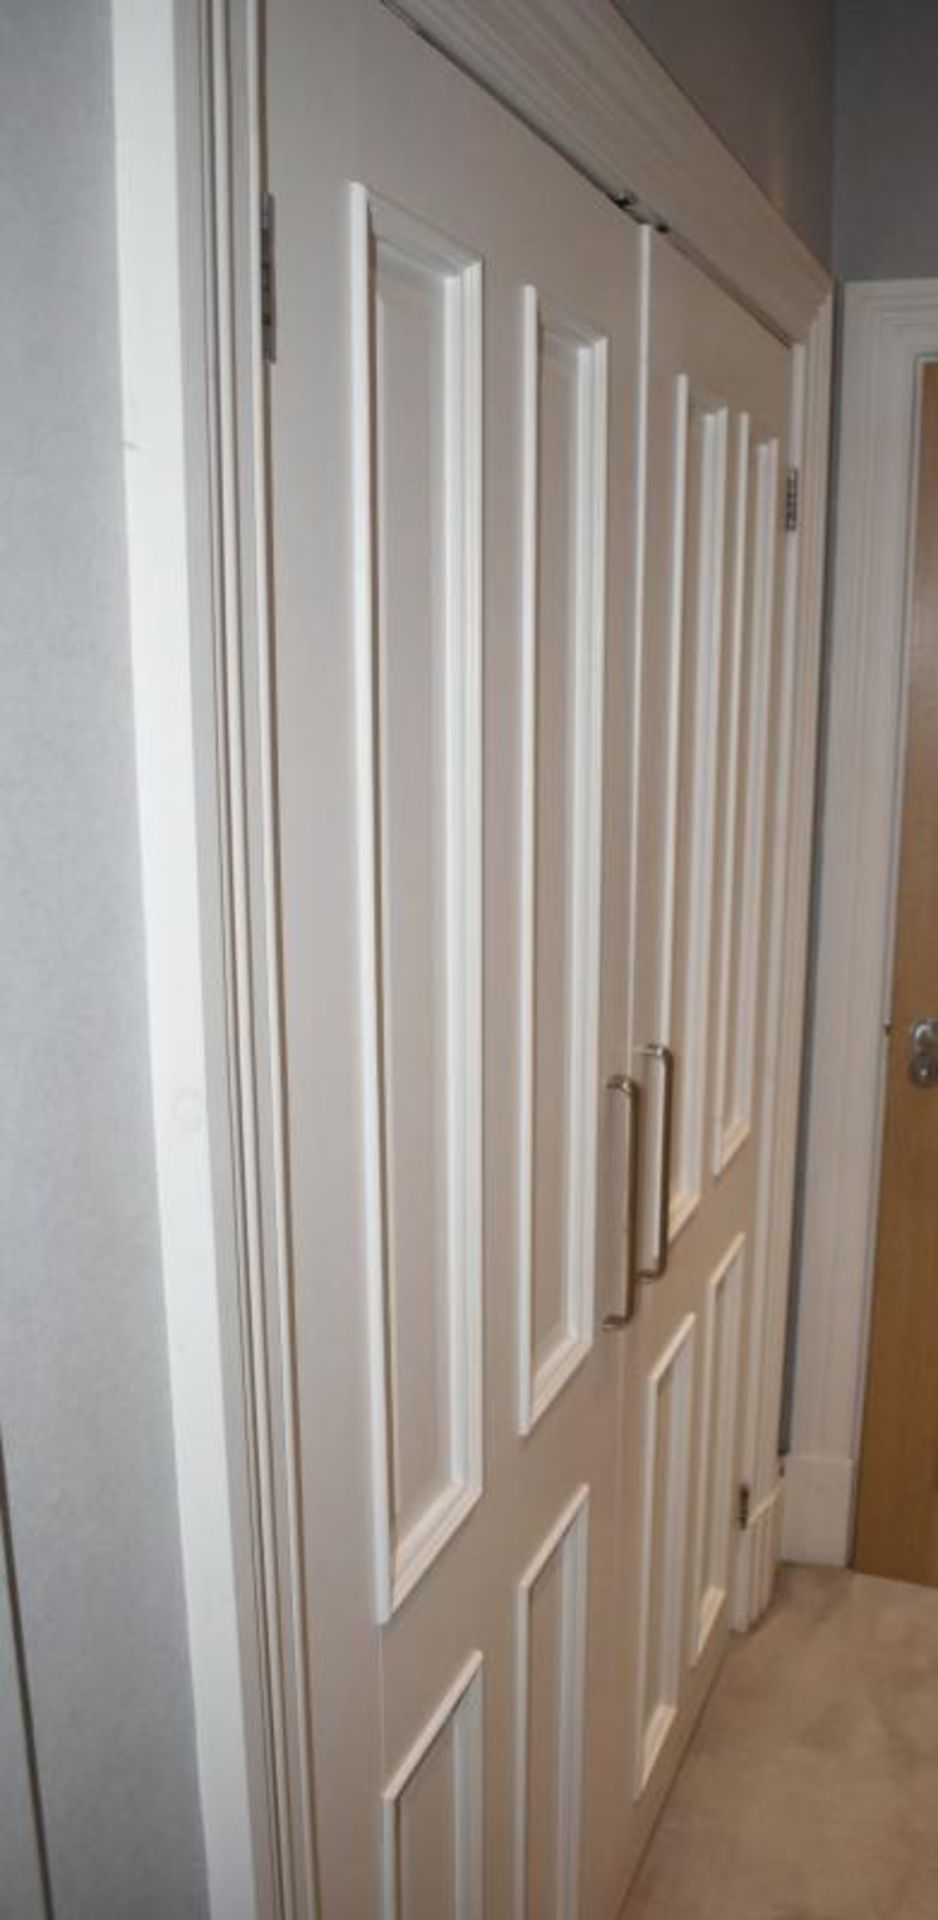 2 x Double Door Built-in Wardrobes In White - Dimensions Of Both: W136 x H195 x D40cm - Ref: ABR060 - Image 3 of 5